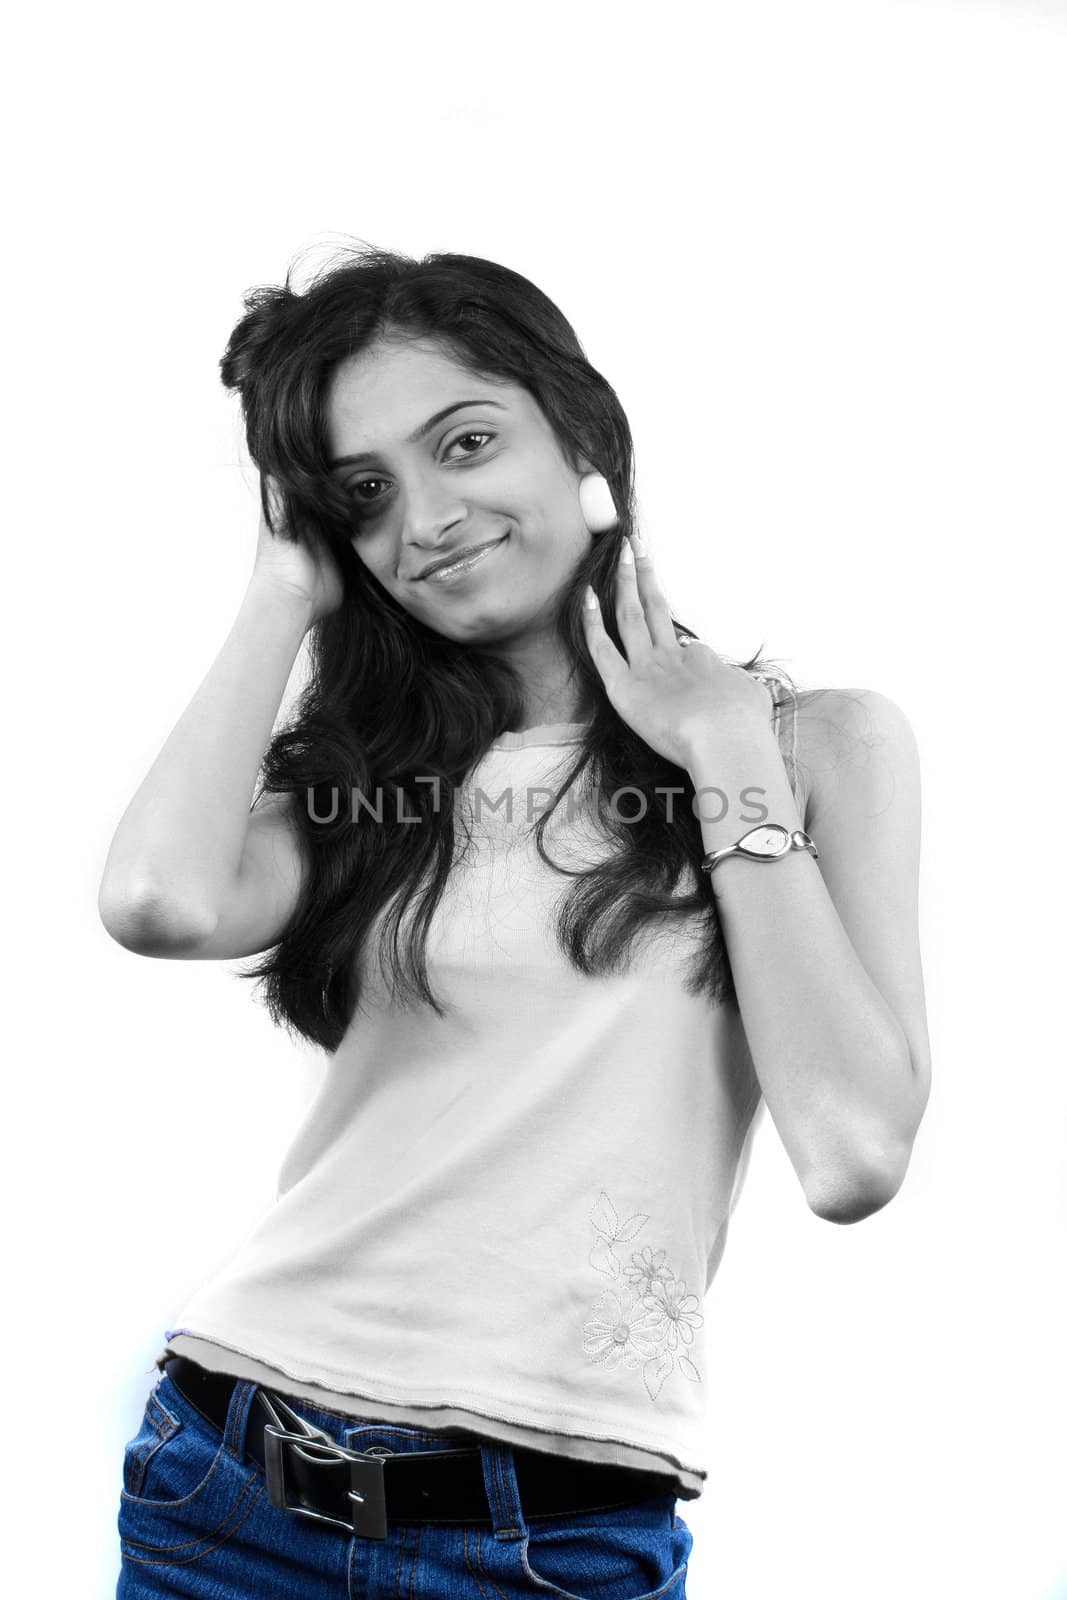 A glamorous Indian model wearing a blue denim jeans, on white studio background.